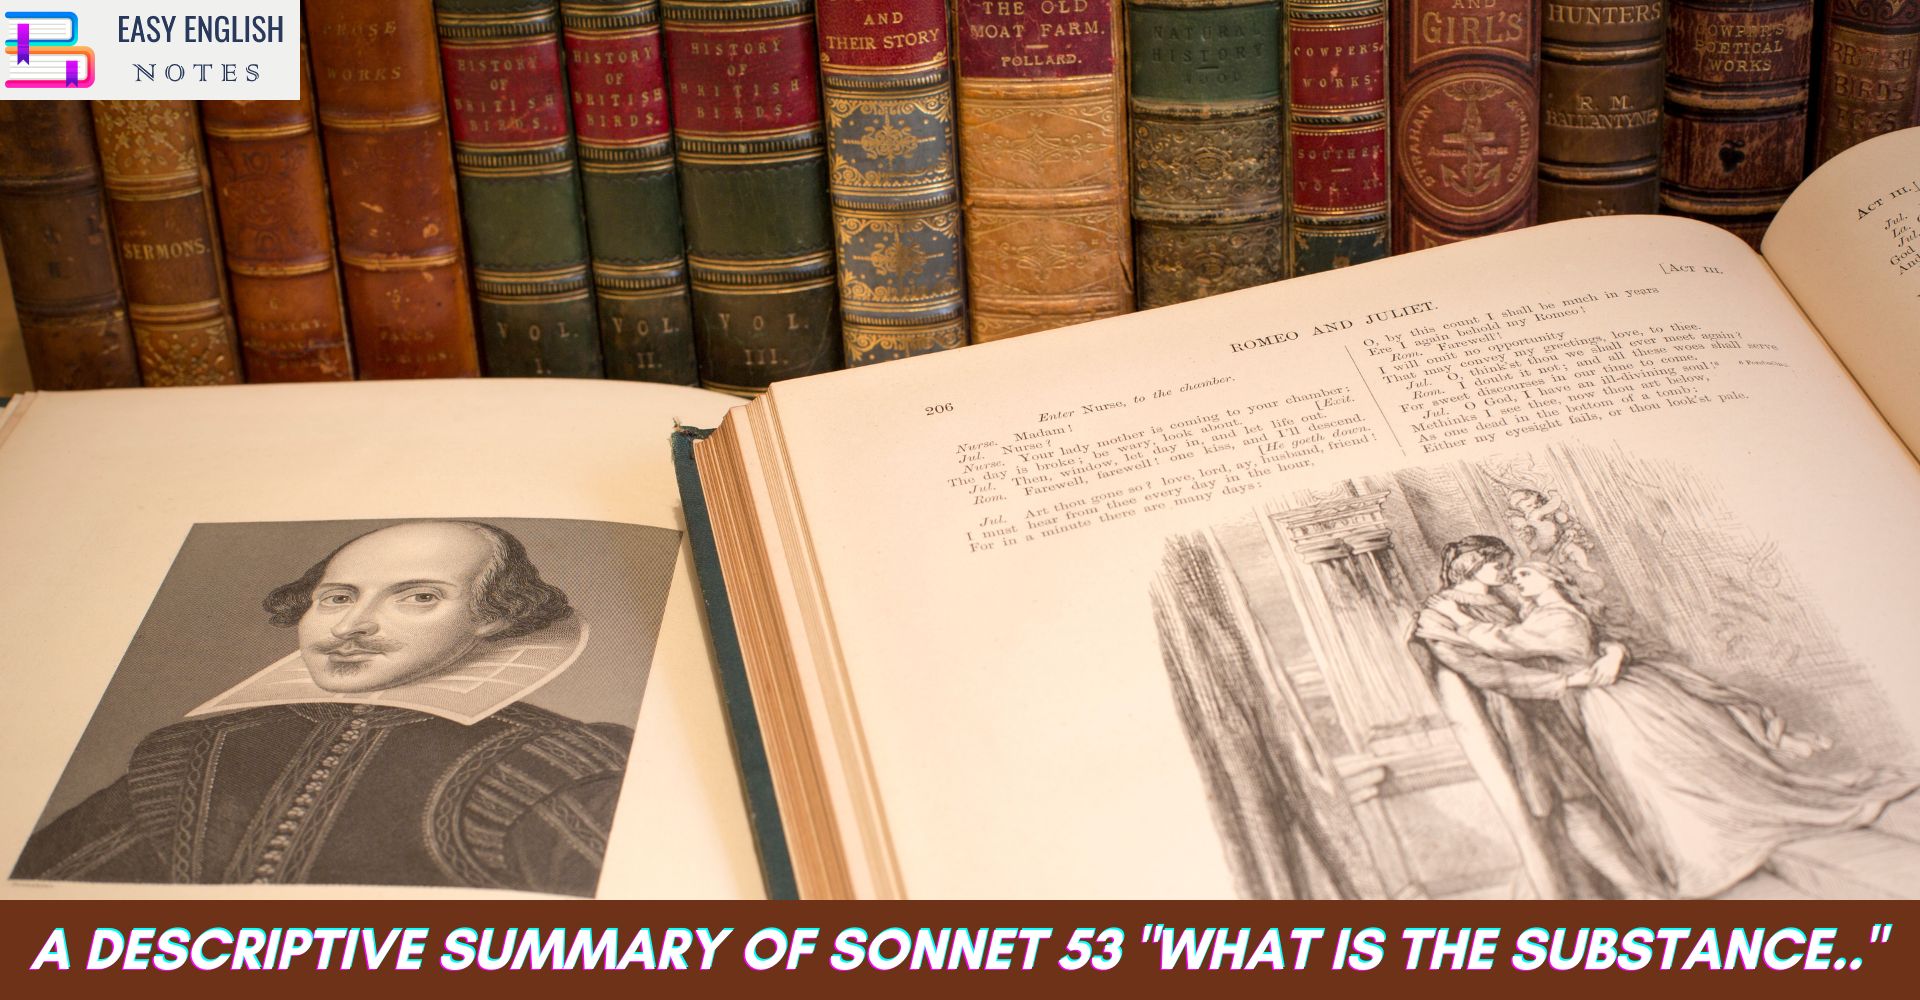 A Descriptive Summary of Sonnet 53 "What is the substance.."